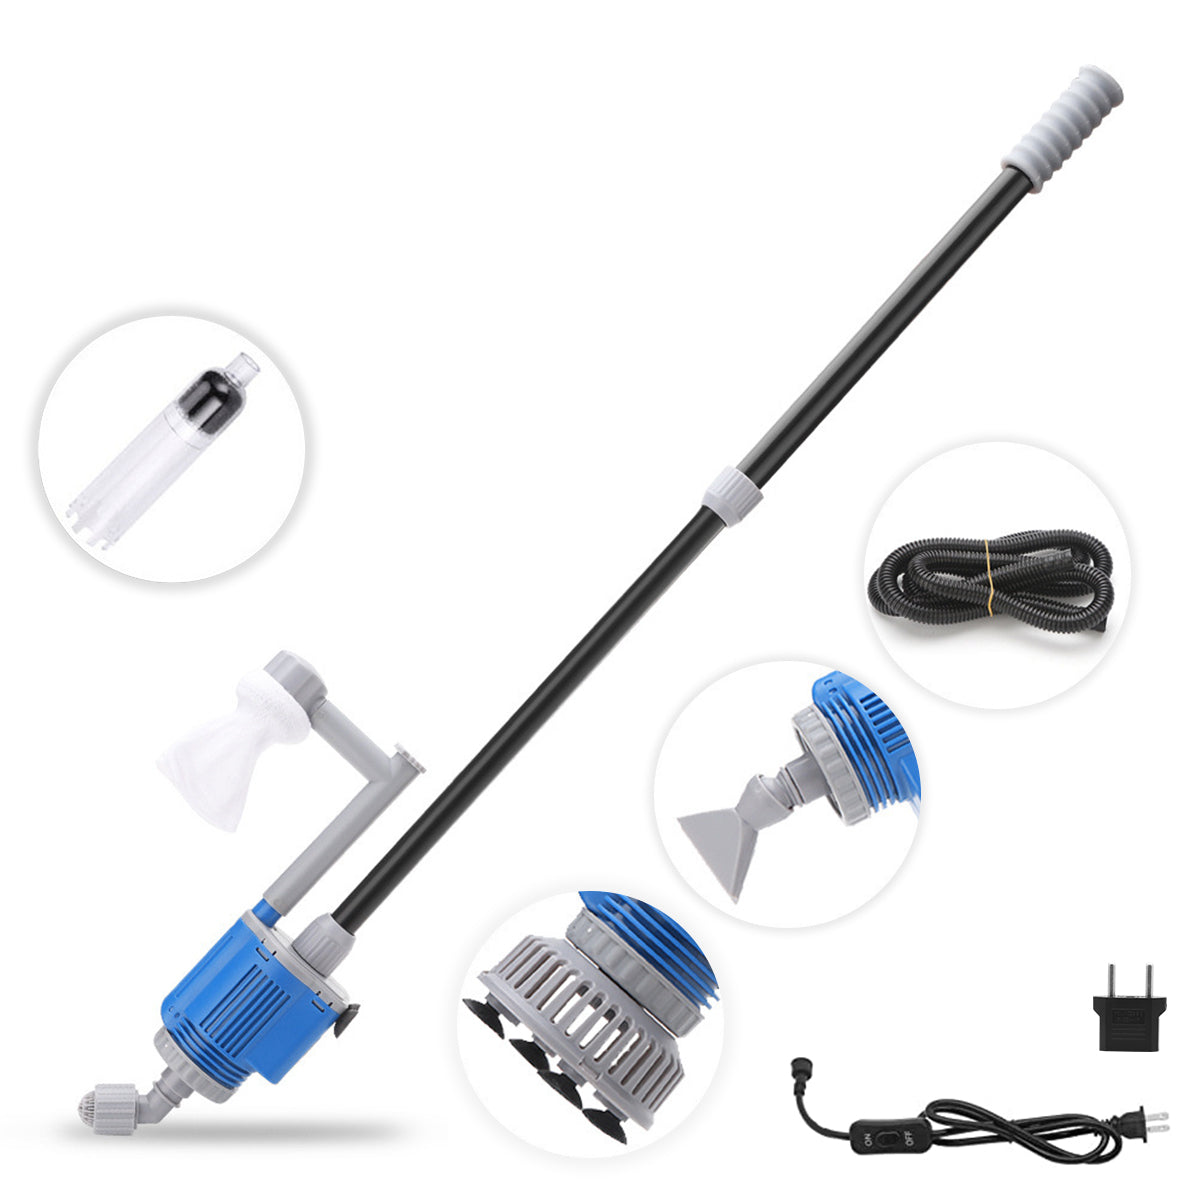 Qpets® Electric Fish Tank Cleaner, Automatic Siphon Vacuum Cleaner Kit